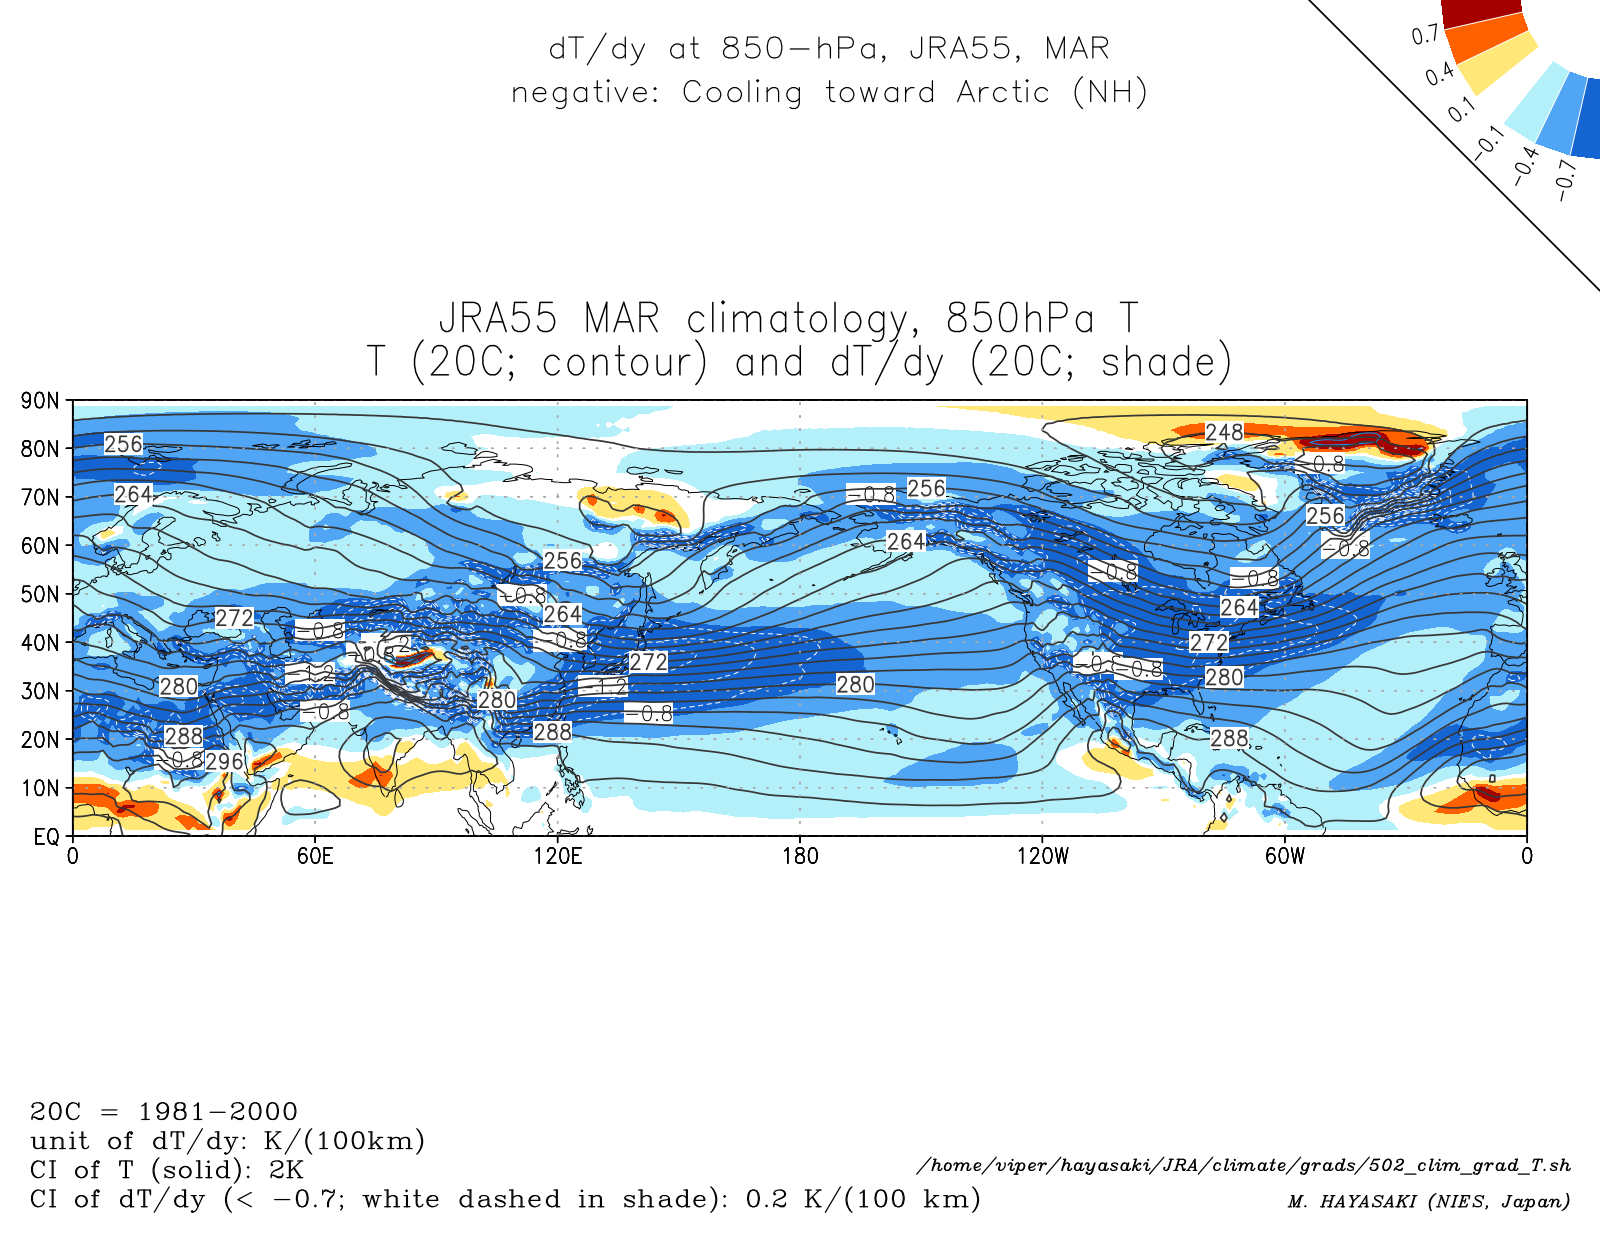 Monthly climatology (Mar) of dT/dy at 850-hPa in the NH